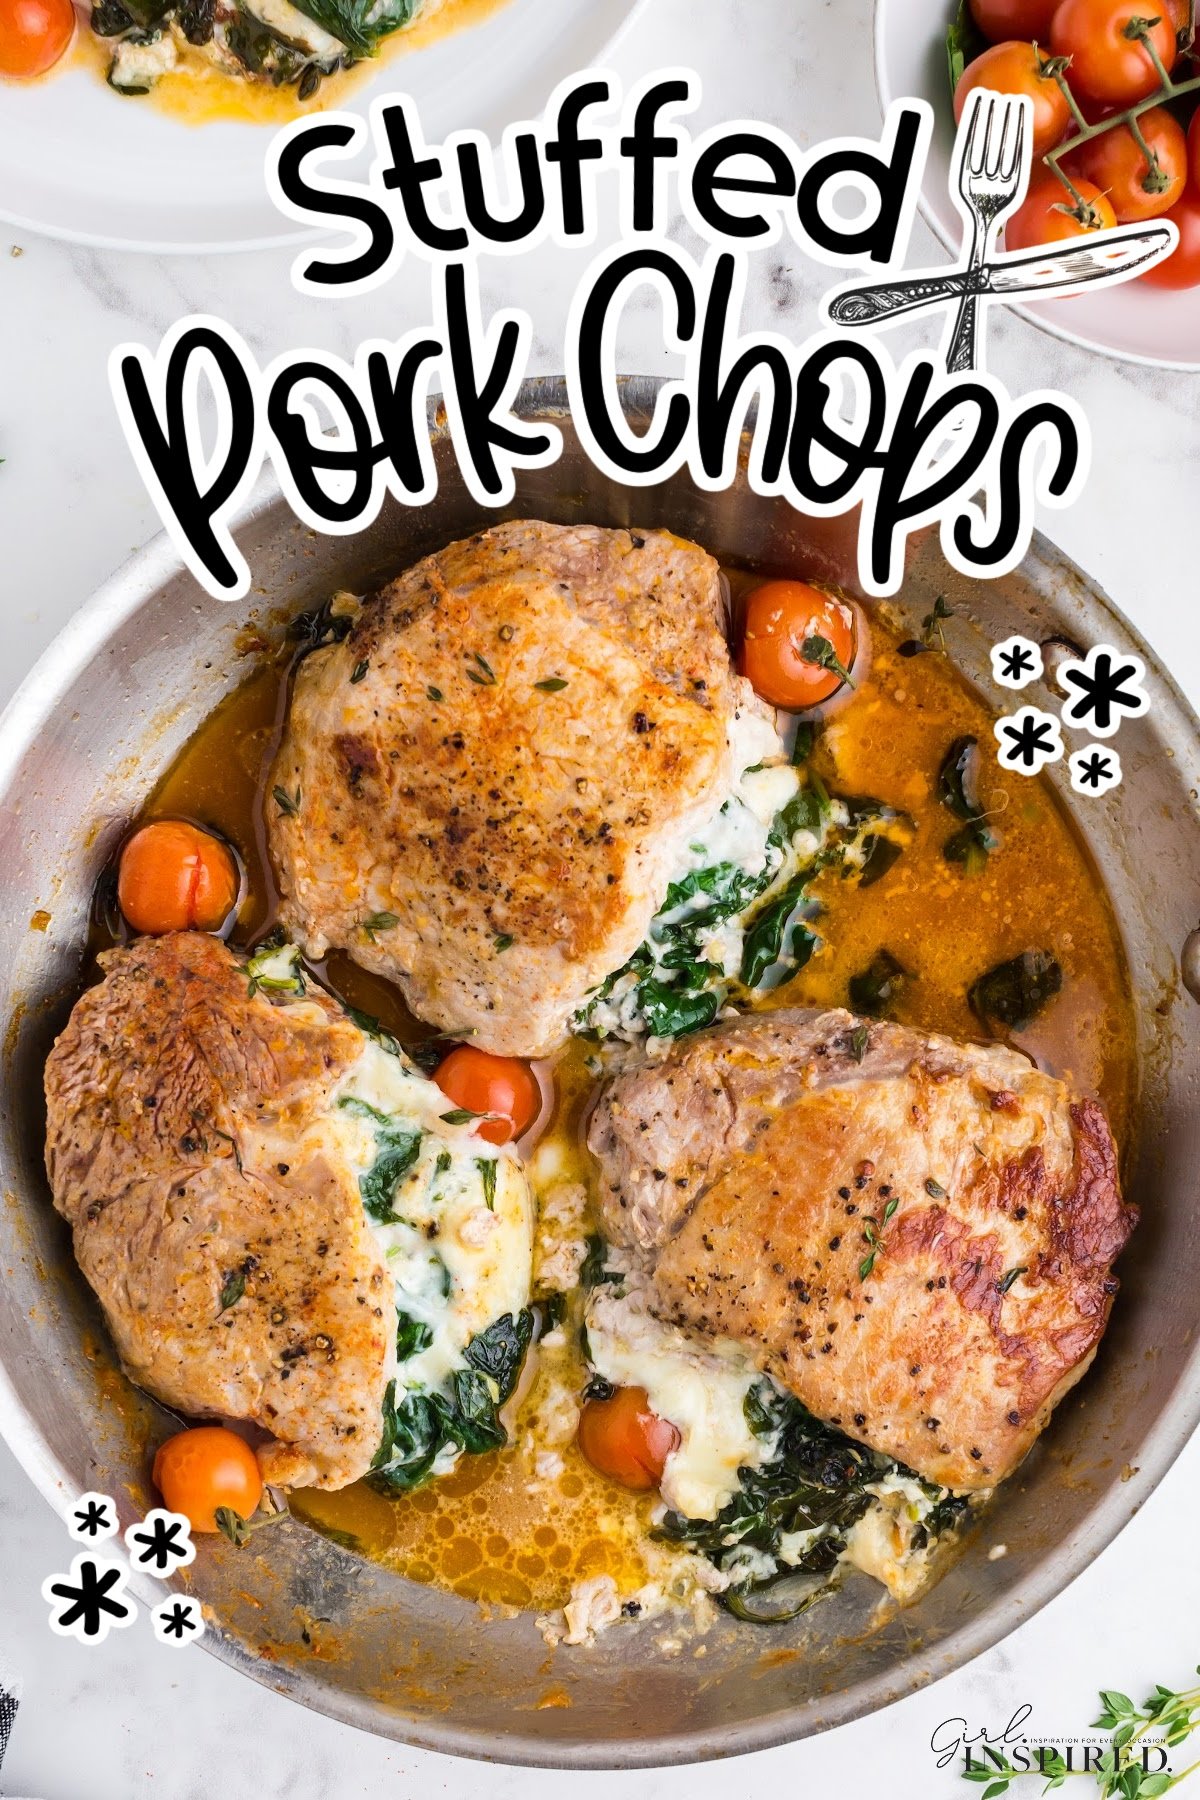 Pan filled with Stuffed Pork Chops with text overlay.